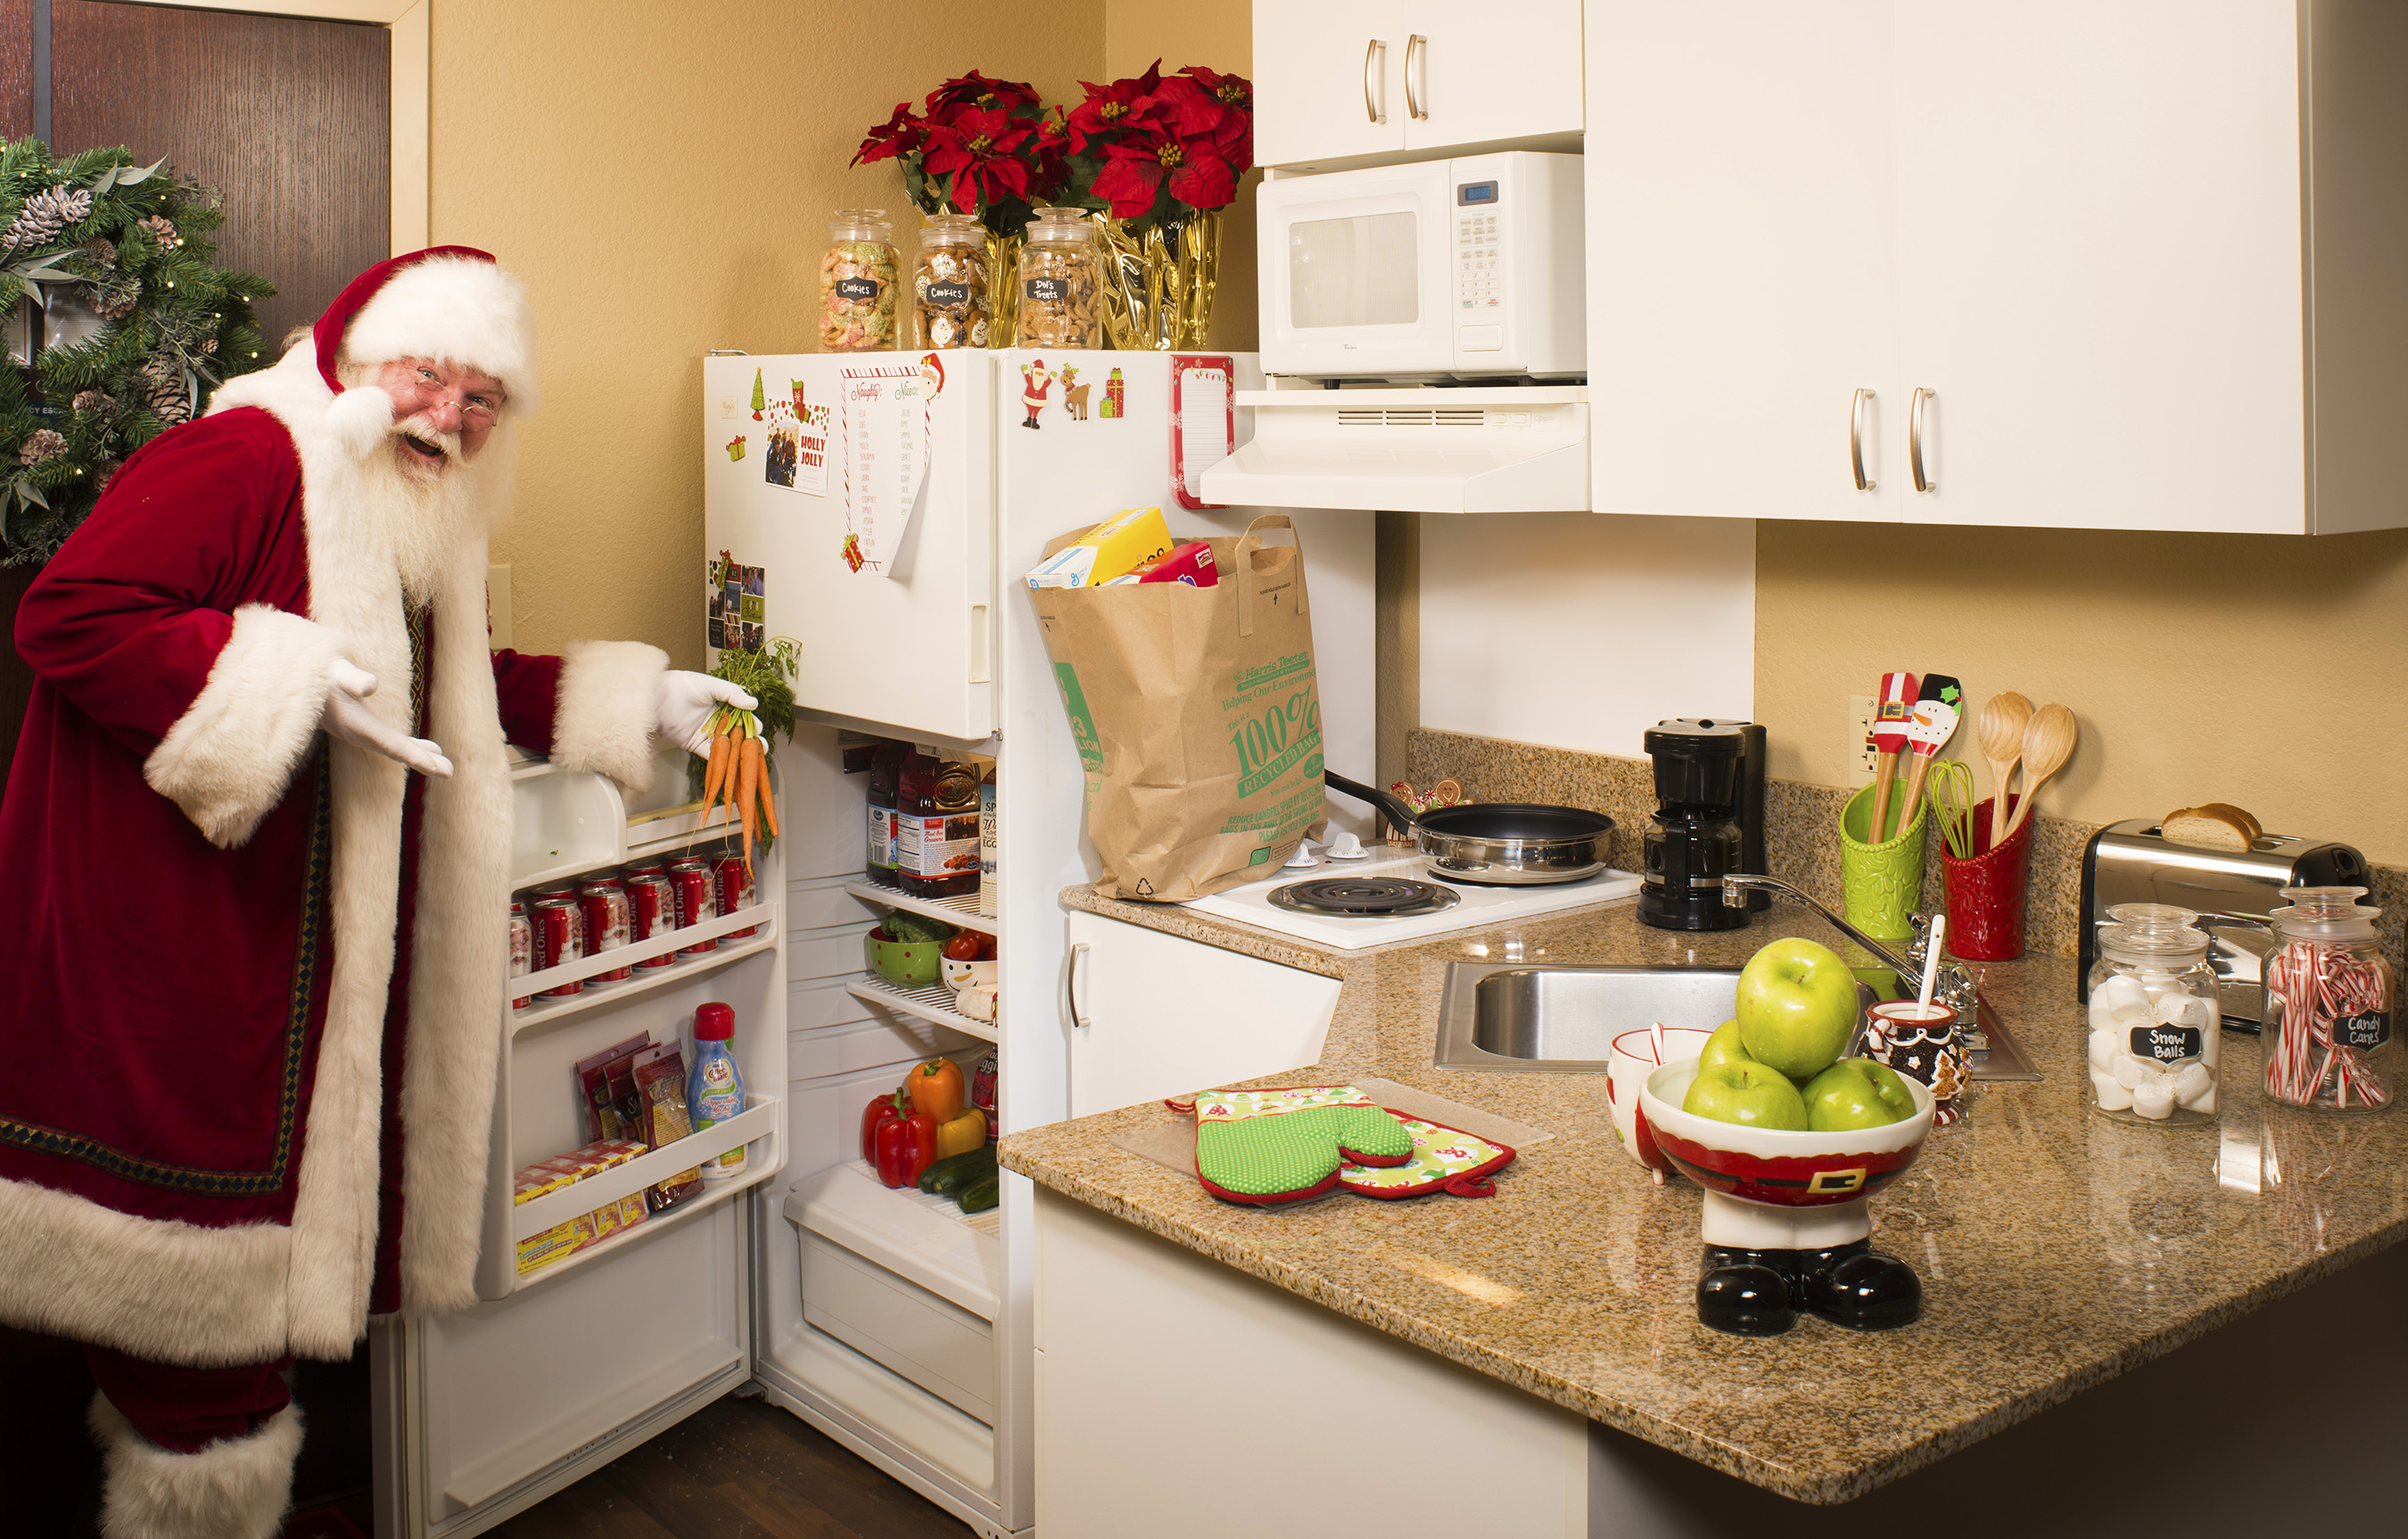 When staying at his official hotel, Extended Stay America, Santa can enjoy his favorite meals. With fully equipped kitchens in every room, guests never miss out on seasonal staples.